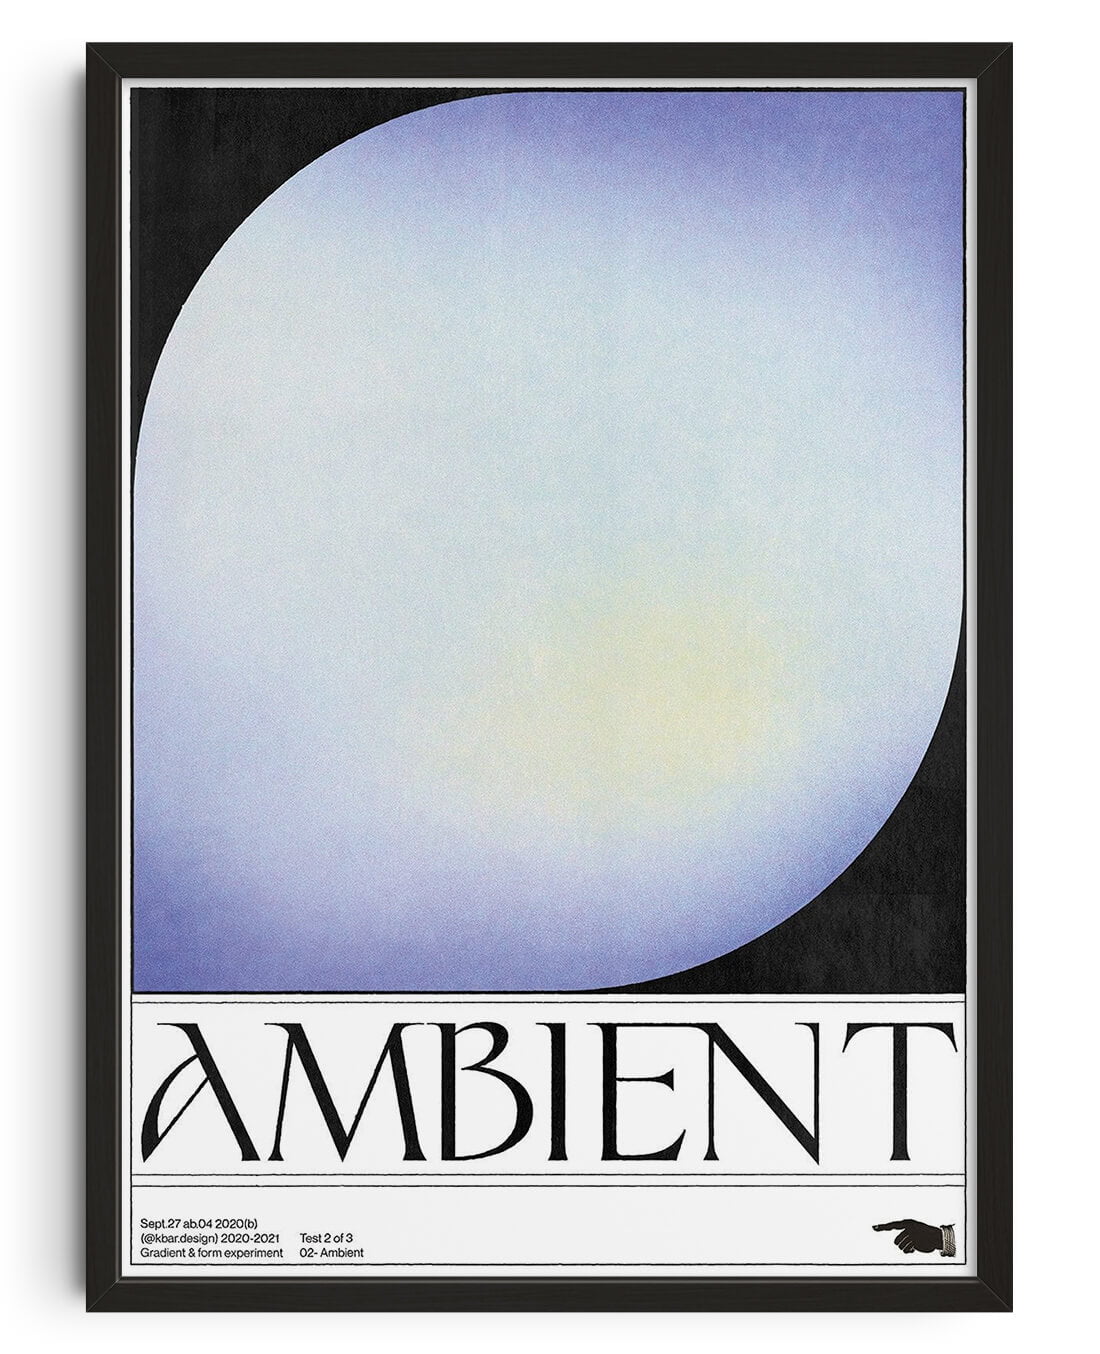 Ambient by Alexander Khabbazi contemporary wall art print from DROOL